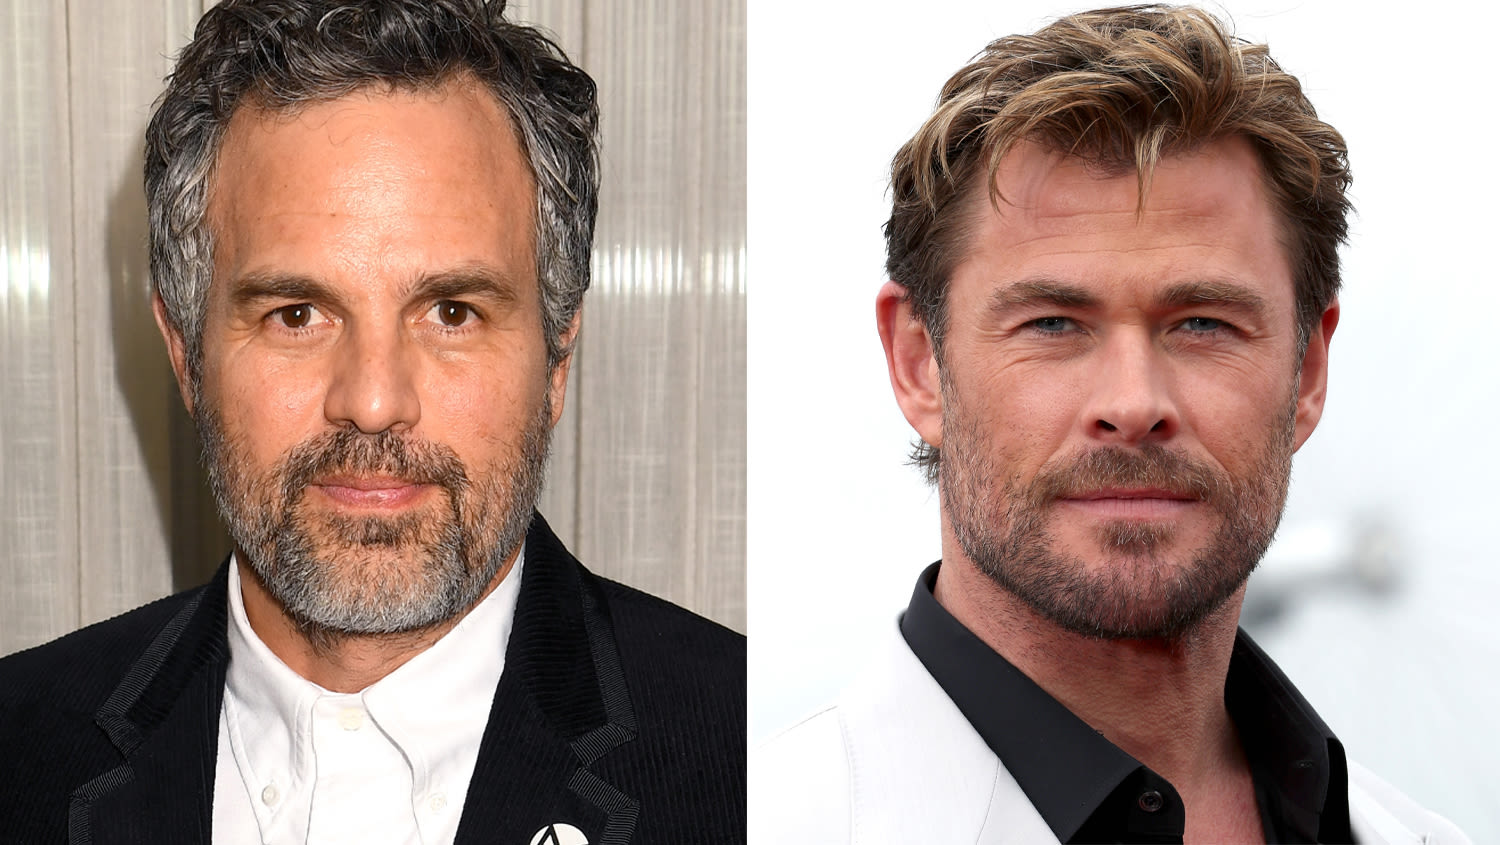 Mark Ruffalo In Talks To Co-Star Opposite Chris Hemsworth In Amazon MGM Studios’ Adaptation Of Don Winslow’s ‘Crime...